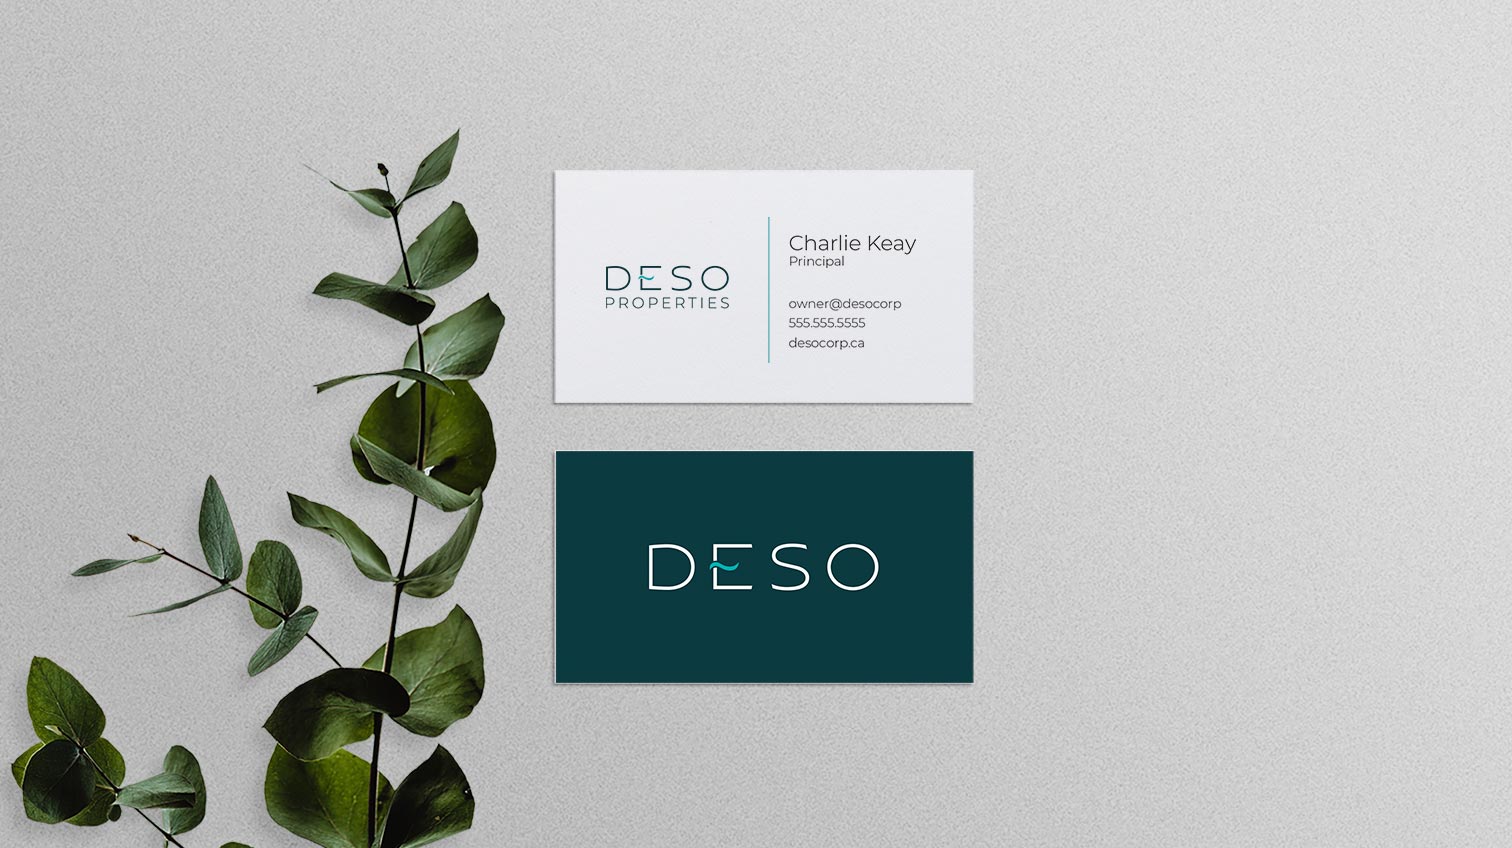 Deso Properties Charlie Keay business card design, front and back - White Canvas Design